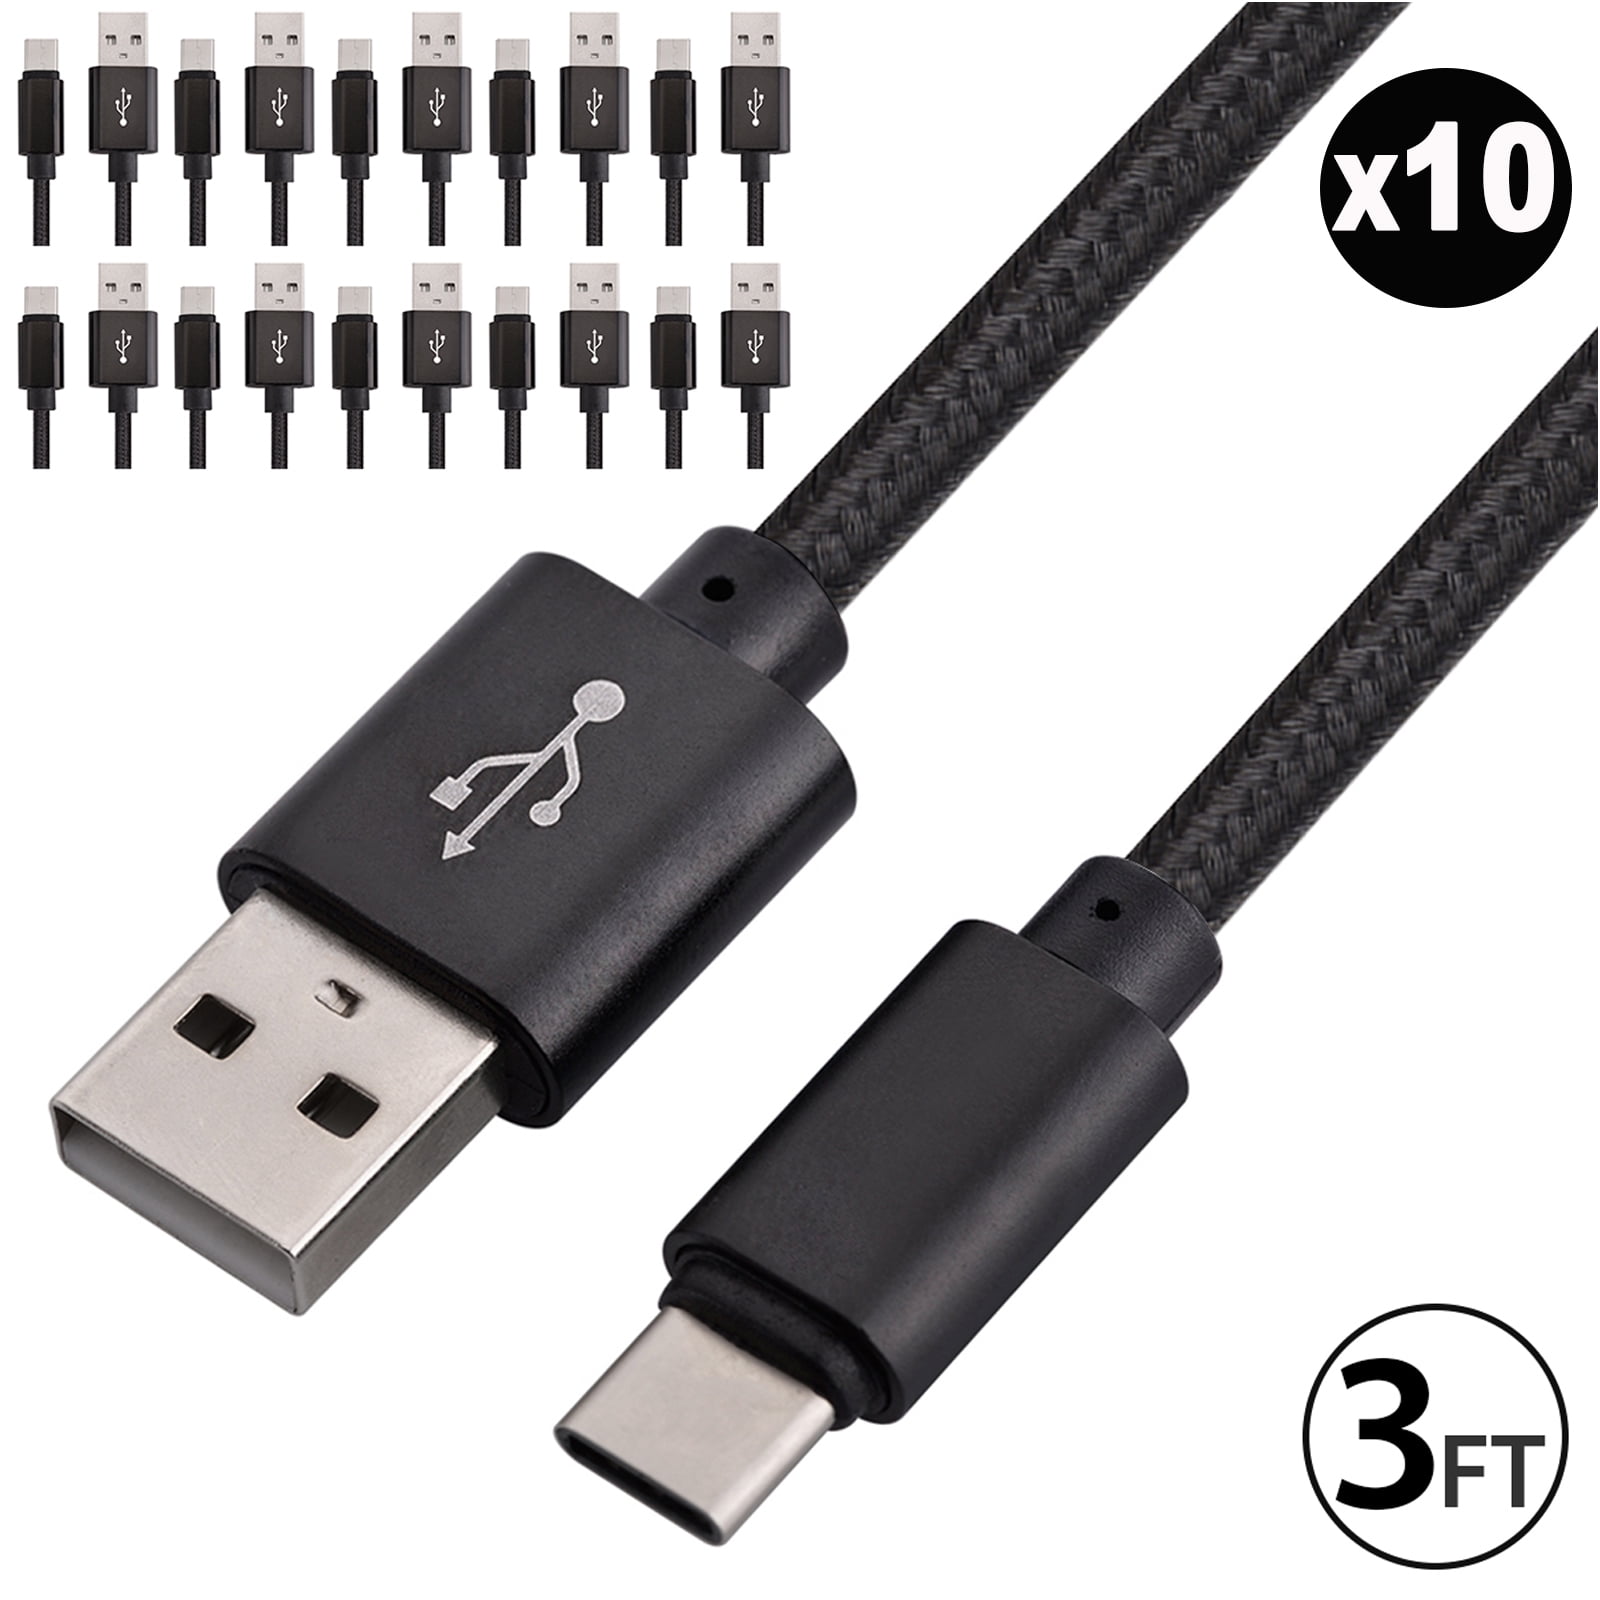 USB-C USB 3.1 TYPE C DATA SYNC CHARGING CABLE LEAD FOR SAMSUNG GALAXY S8,S8 PLUS